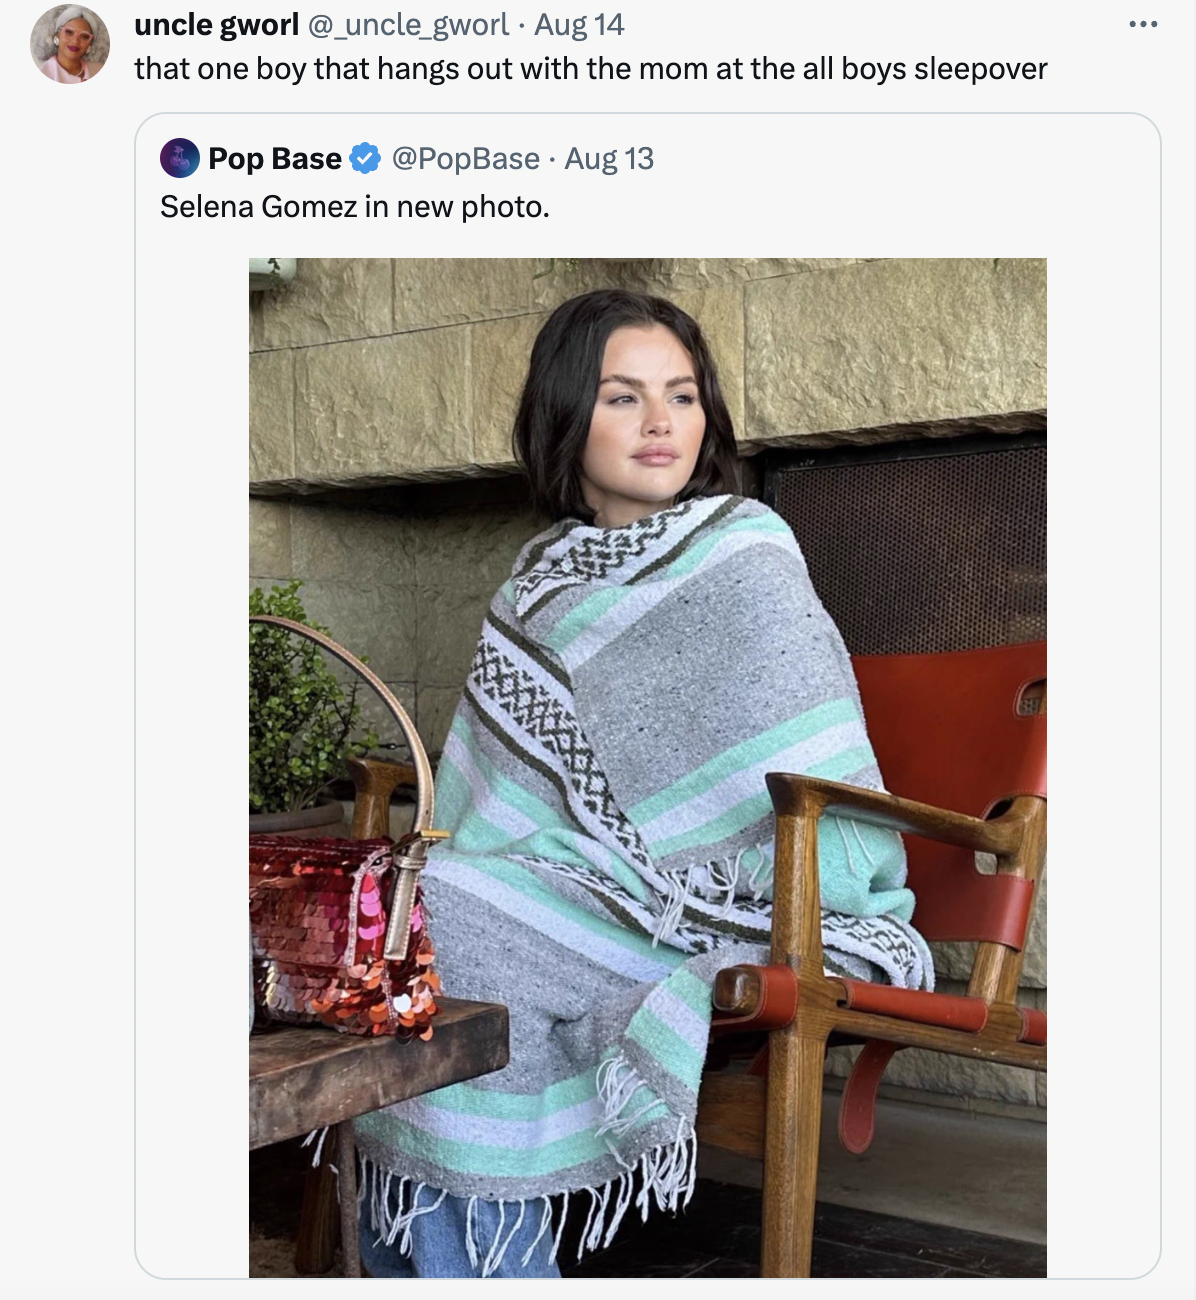 selena gomez in a blanket - stole - uncle gworl Aug 14 that one boy that hangs out with the mom at the all boys sleepover Pop Base Aug 13 Selena Gomez in new photo. Dr